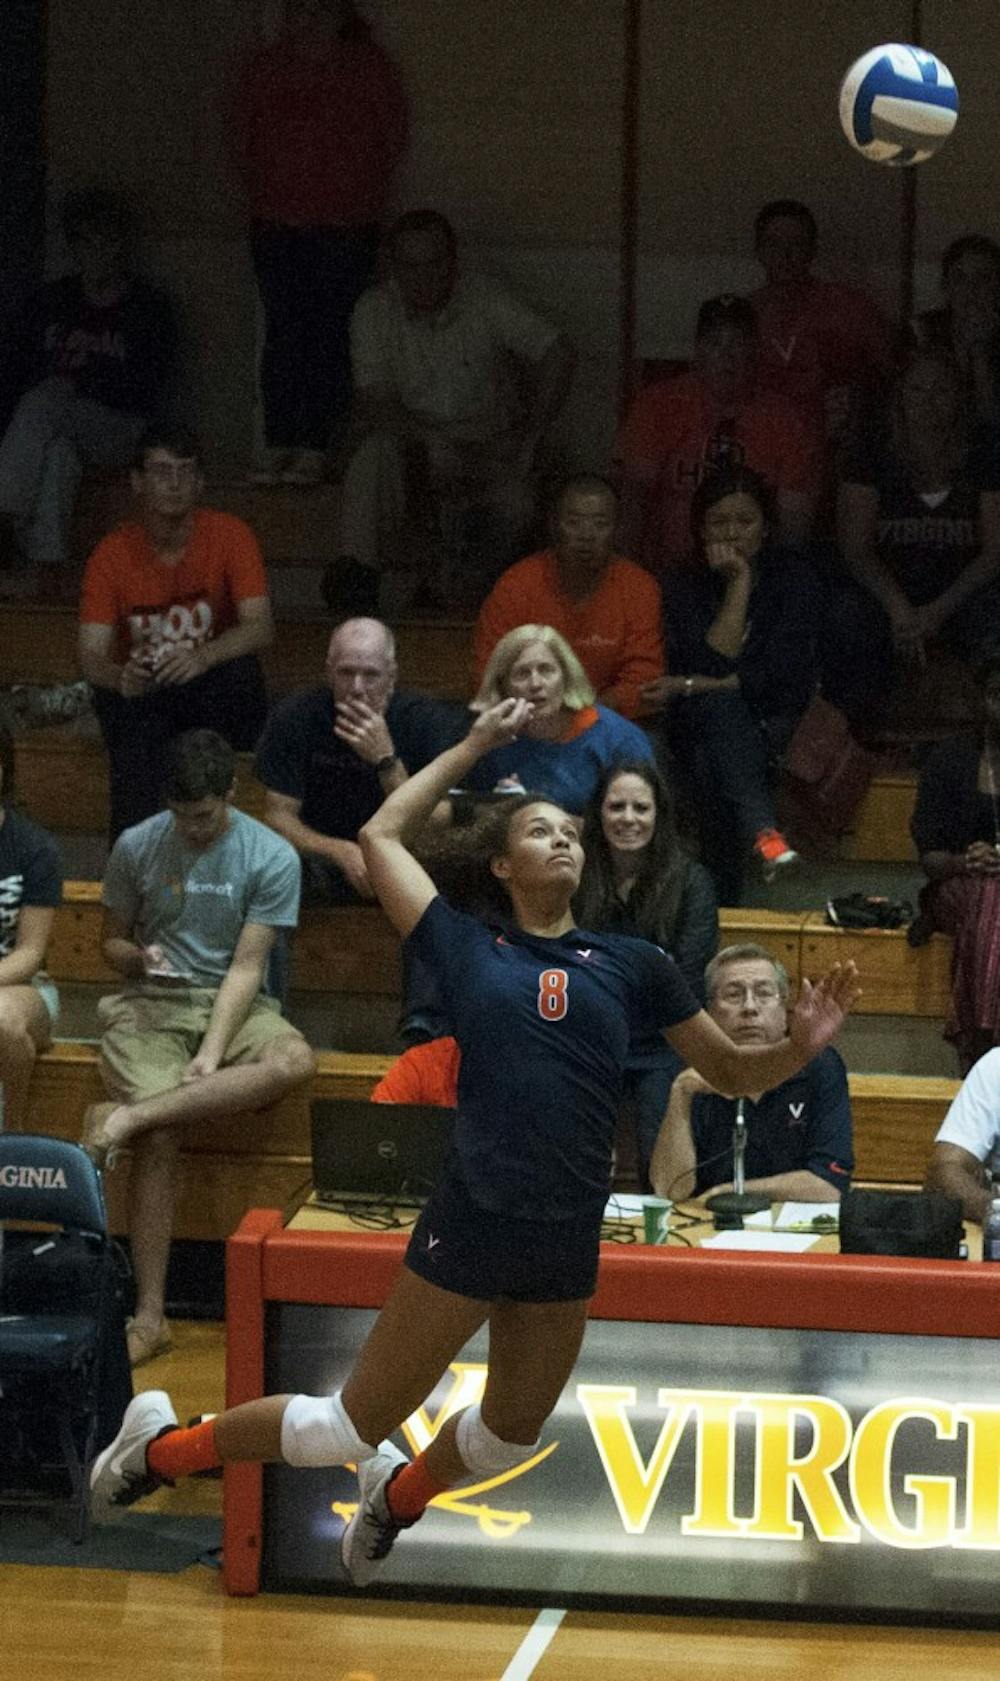 <p>Senior outside hitter Tori Janowski competed inside Memorial Gymnasium for the last time Sunday afternoon. She has 1,182 kills in her Virginia career. </p>